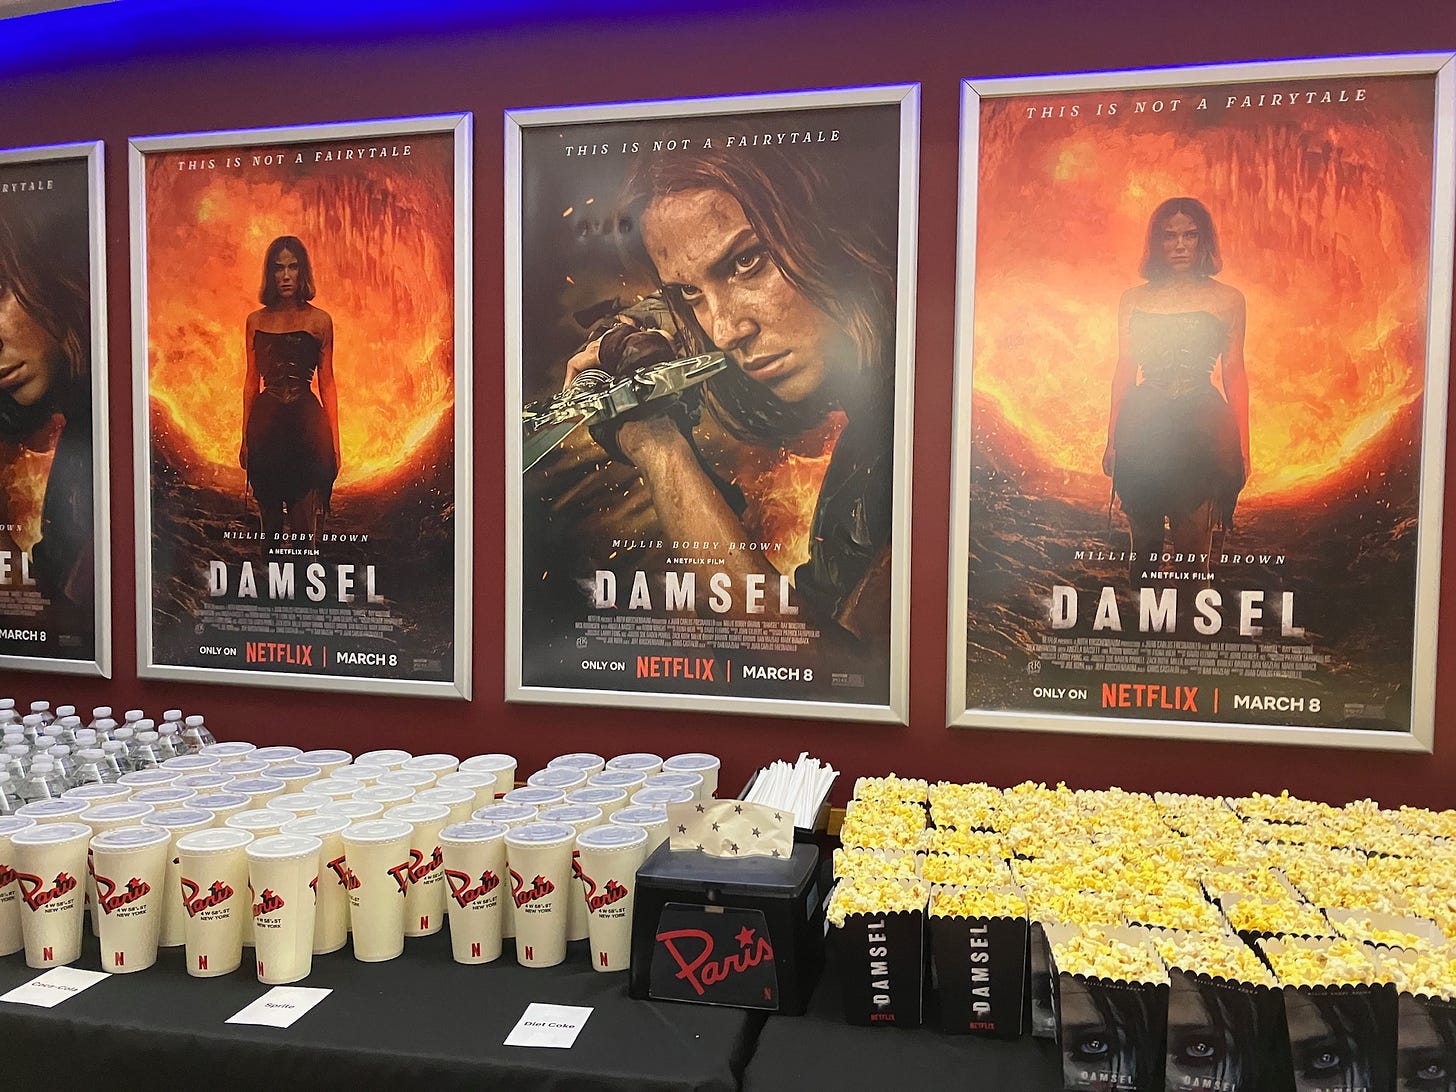 Popcorn and treats at the Damsel World Premiere in NYC